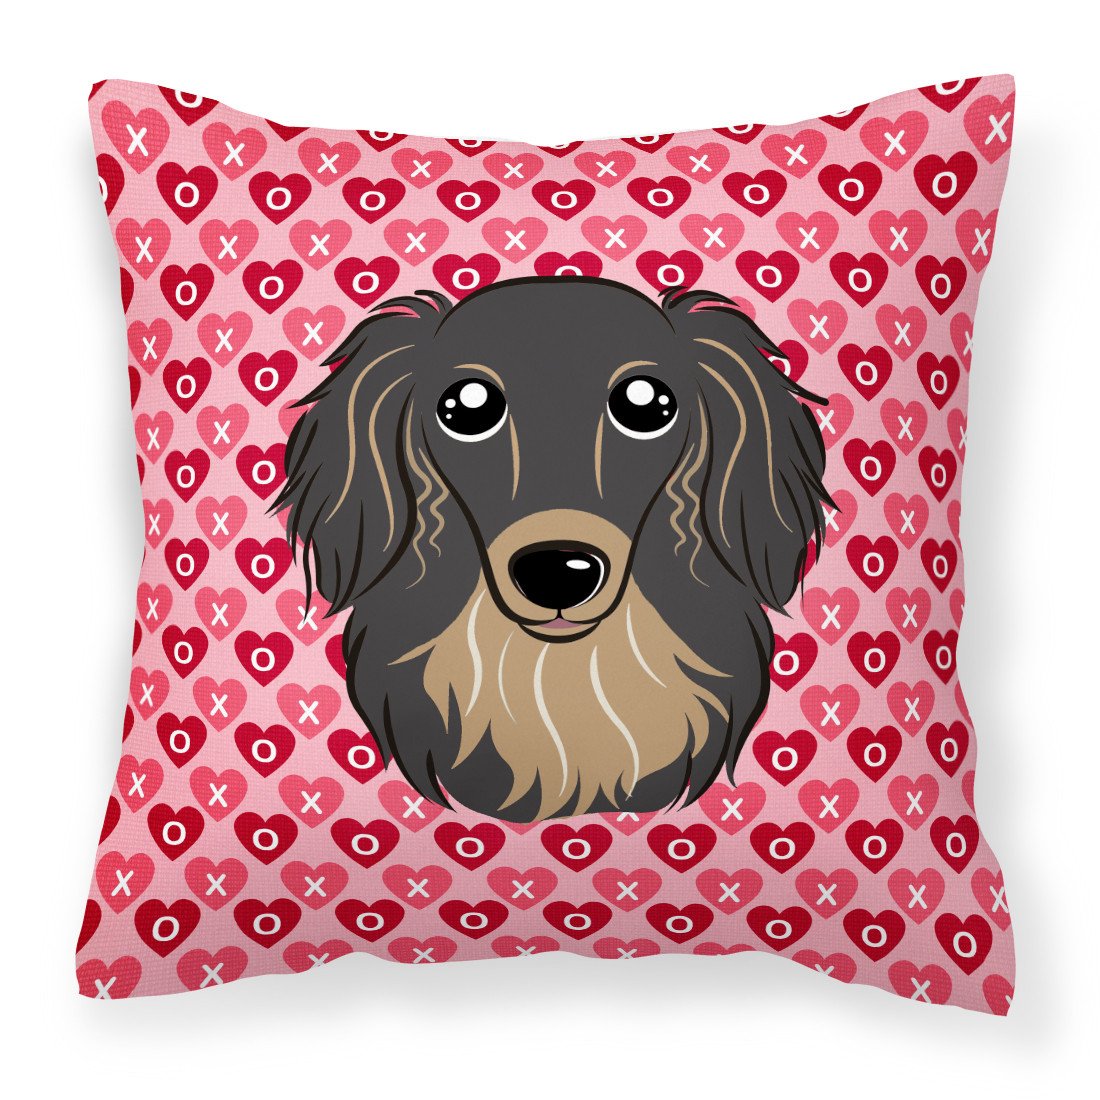 Longhair Black and Tan Dachshund Hearts Fabric Decorative Pillow BB5283PW1818 by Caroline's Treasures